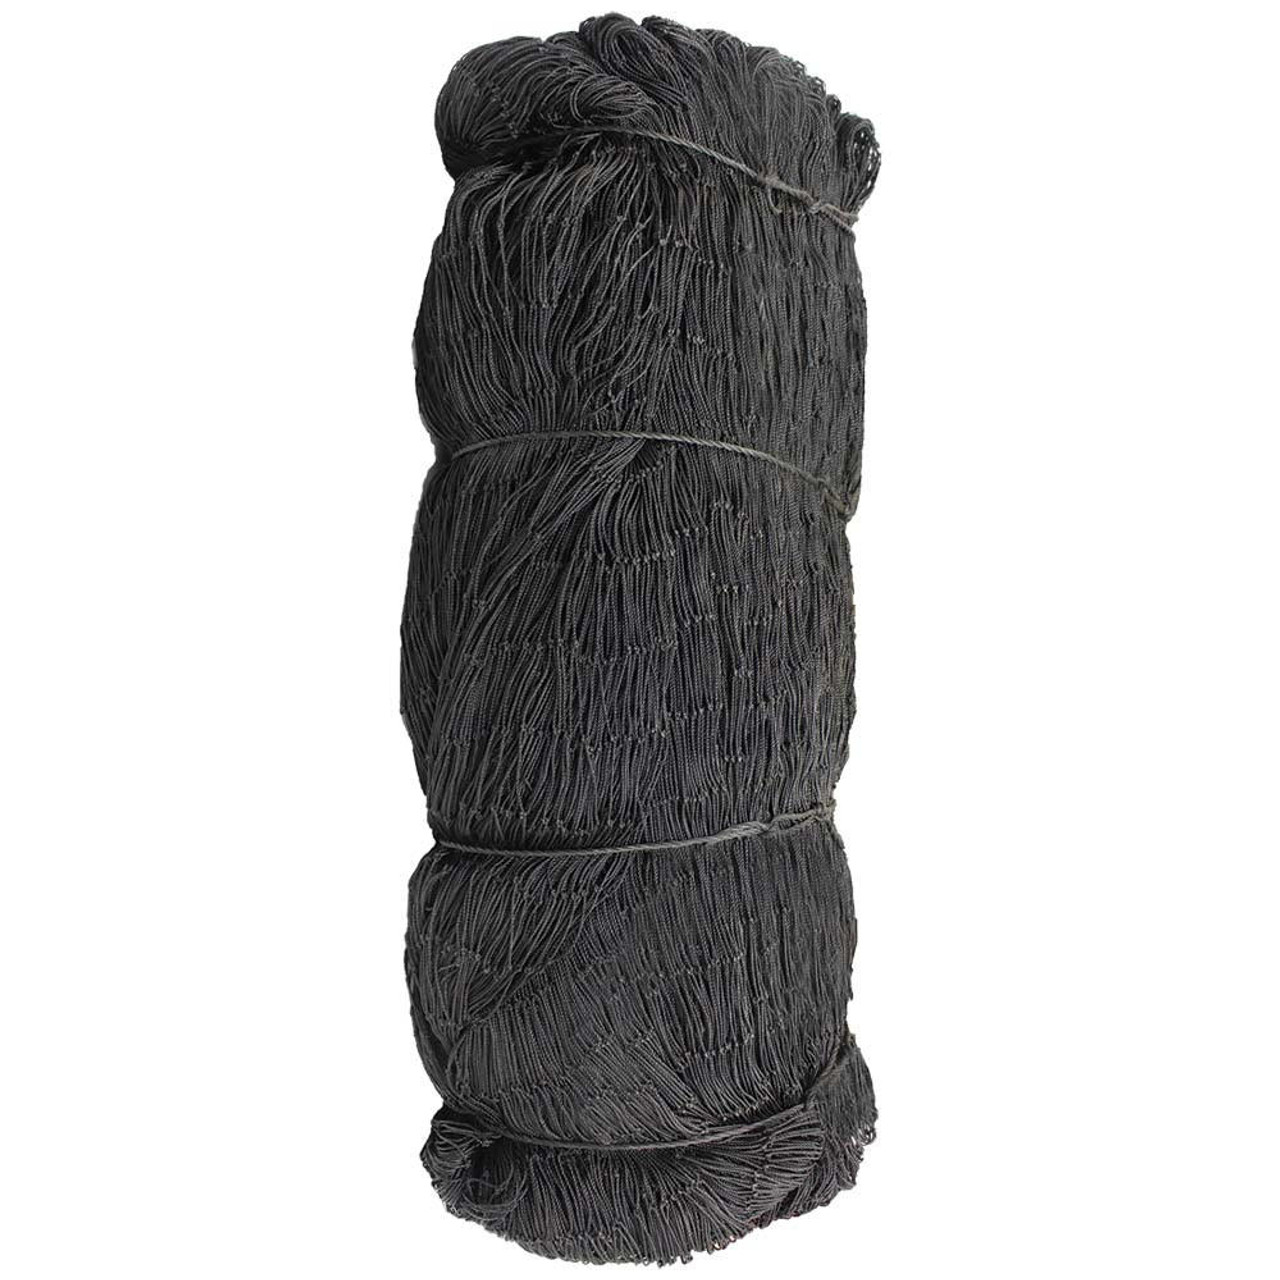 1 Heavy Duty Knotted Netting